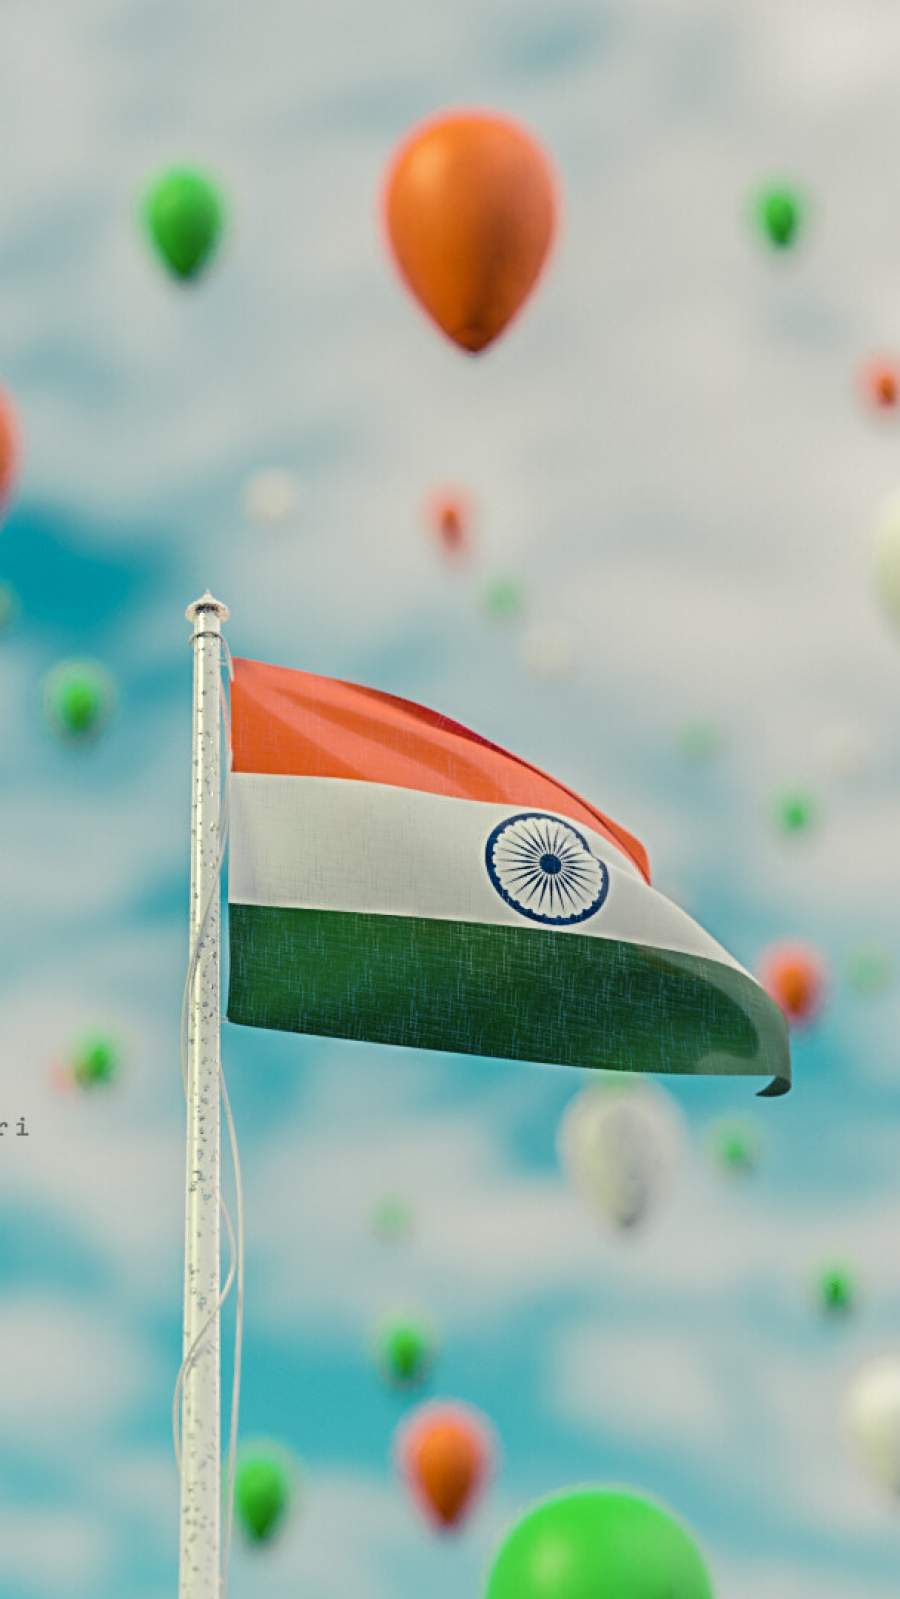 108 BEST Happy Republic Day Images Photos  Pictures 2023